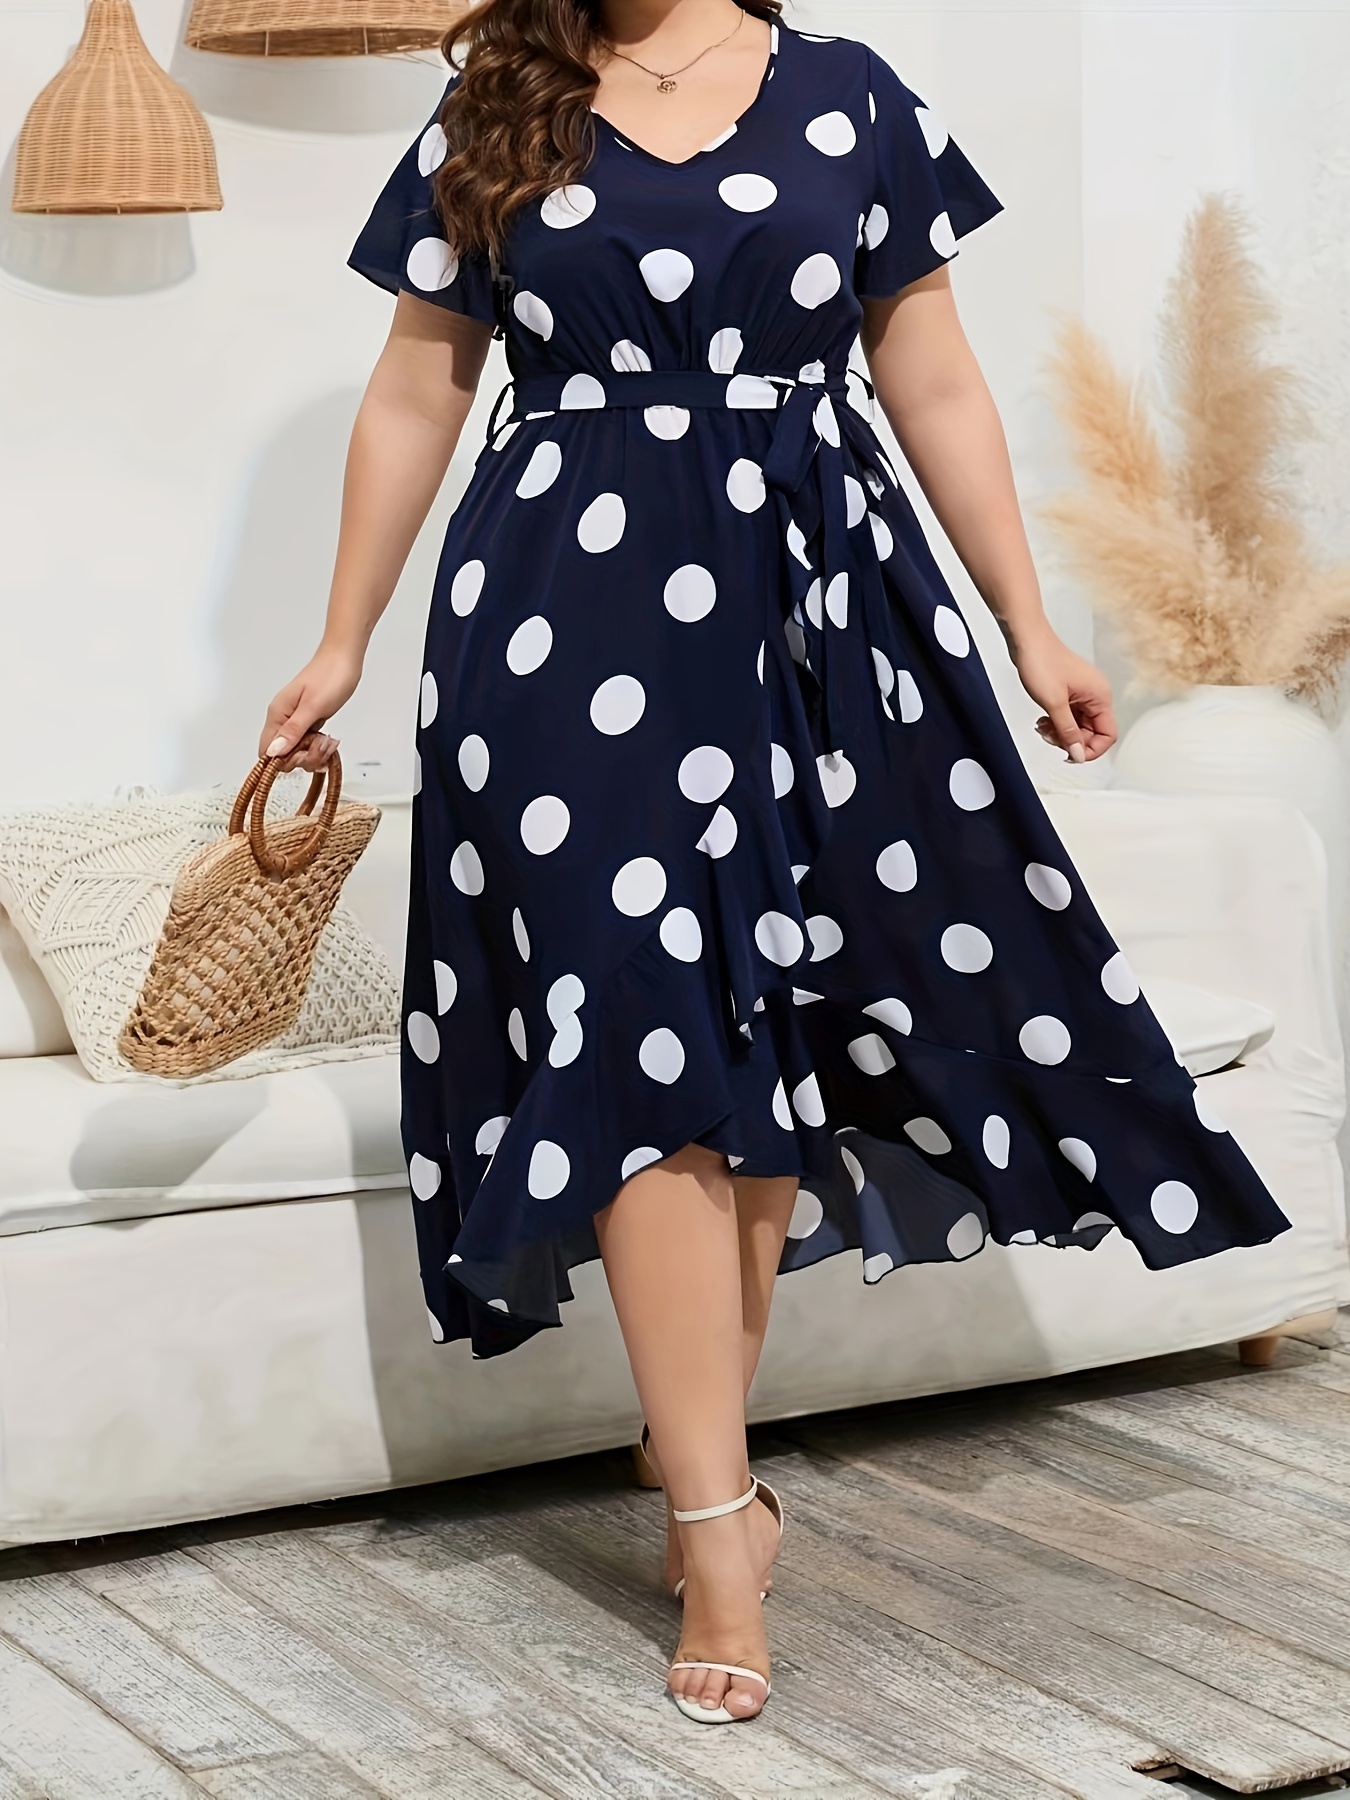 SHOPESSA Plus Size Clothes for Women Women's Sexy Dress Sleeveless V-neck  Polka Dot Front Buttoned Dress With Belt 